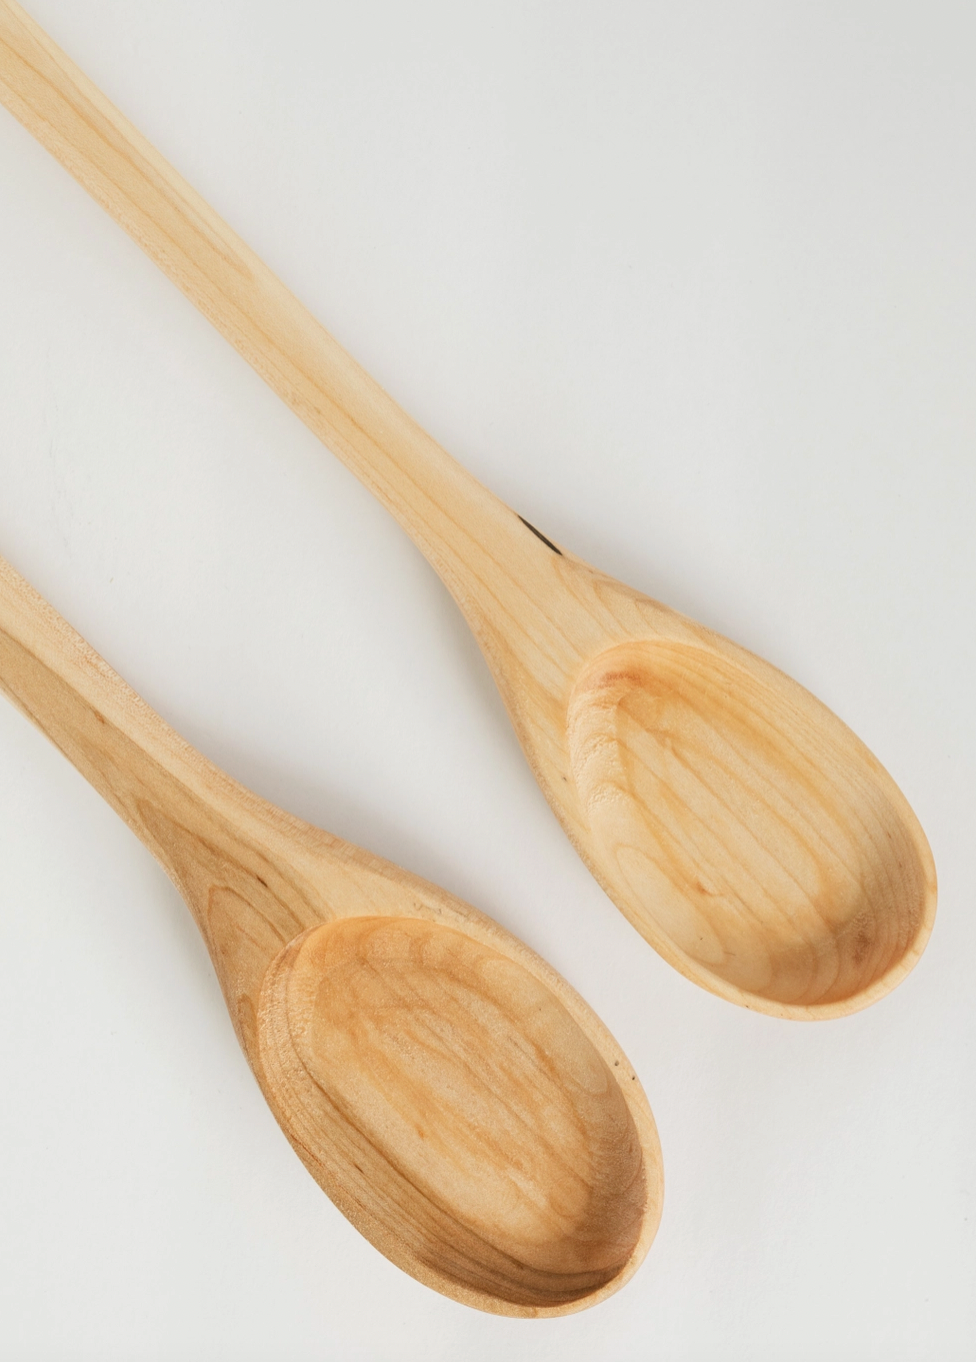 The Handcrafted Spoons